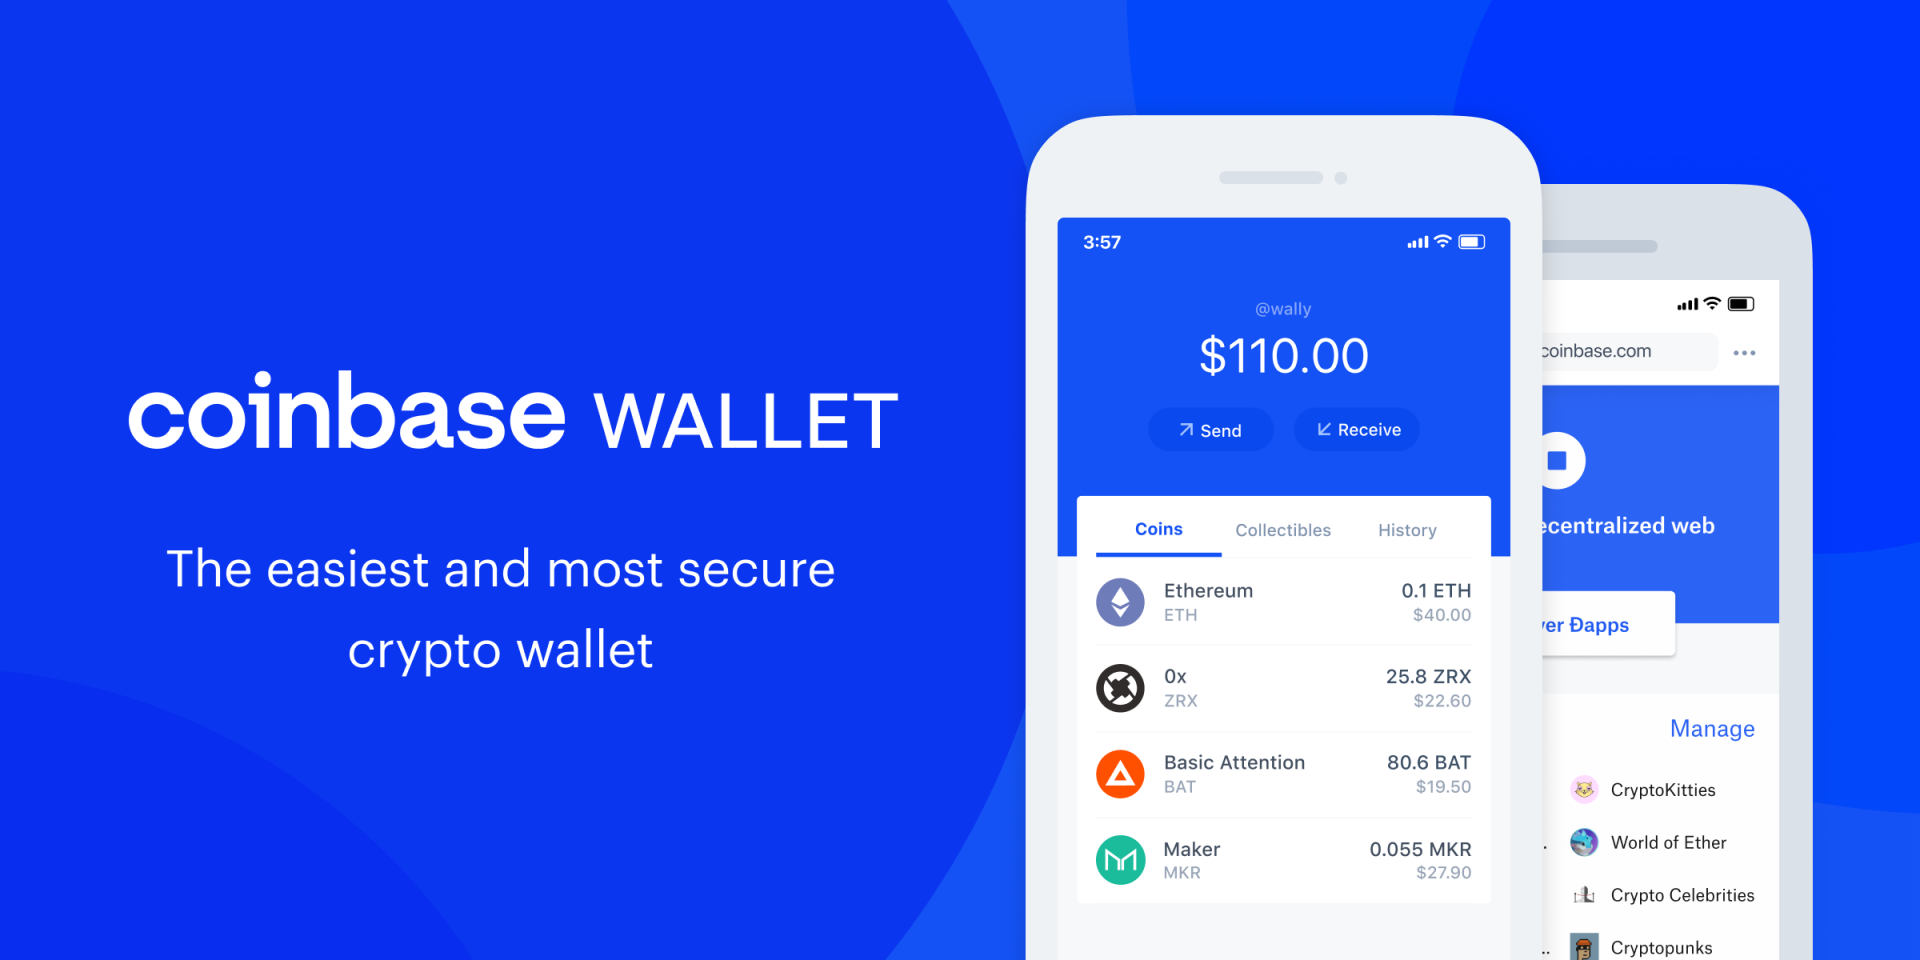 Coinbase Referral Code: demich_y (Up to $ for Getting Started)